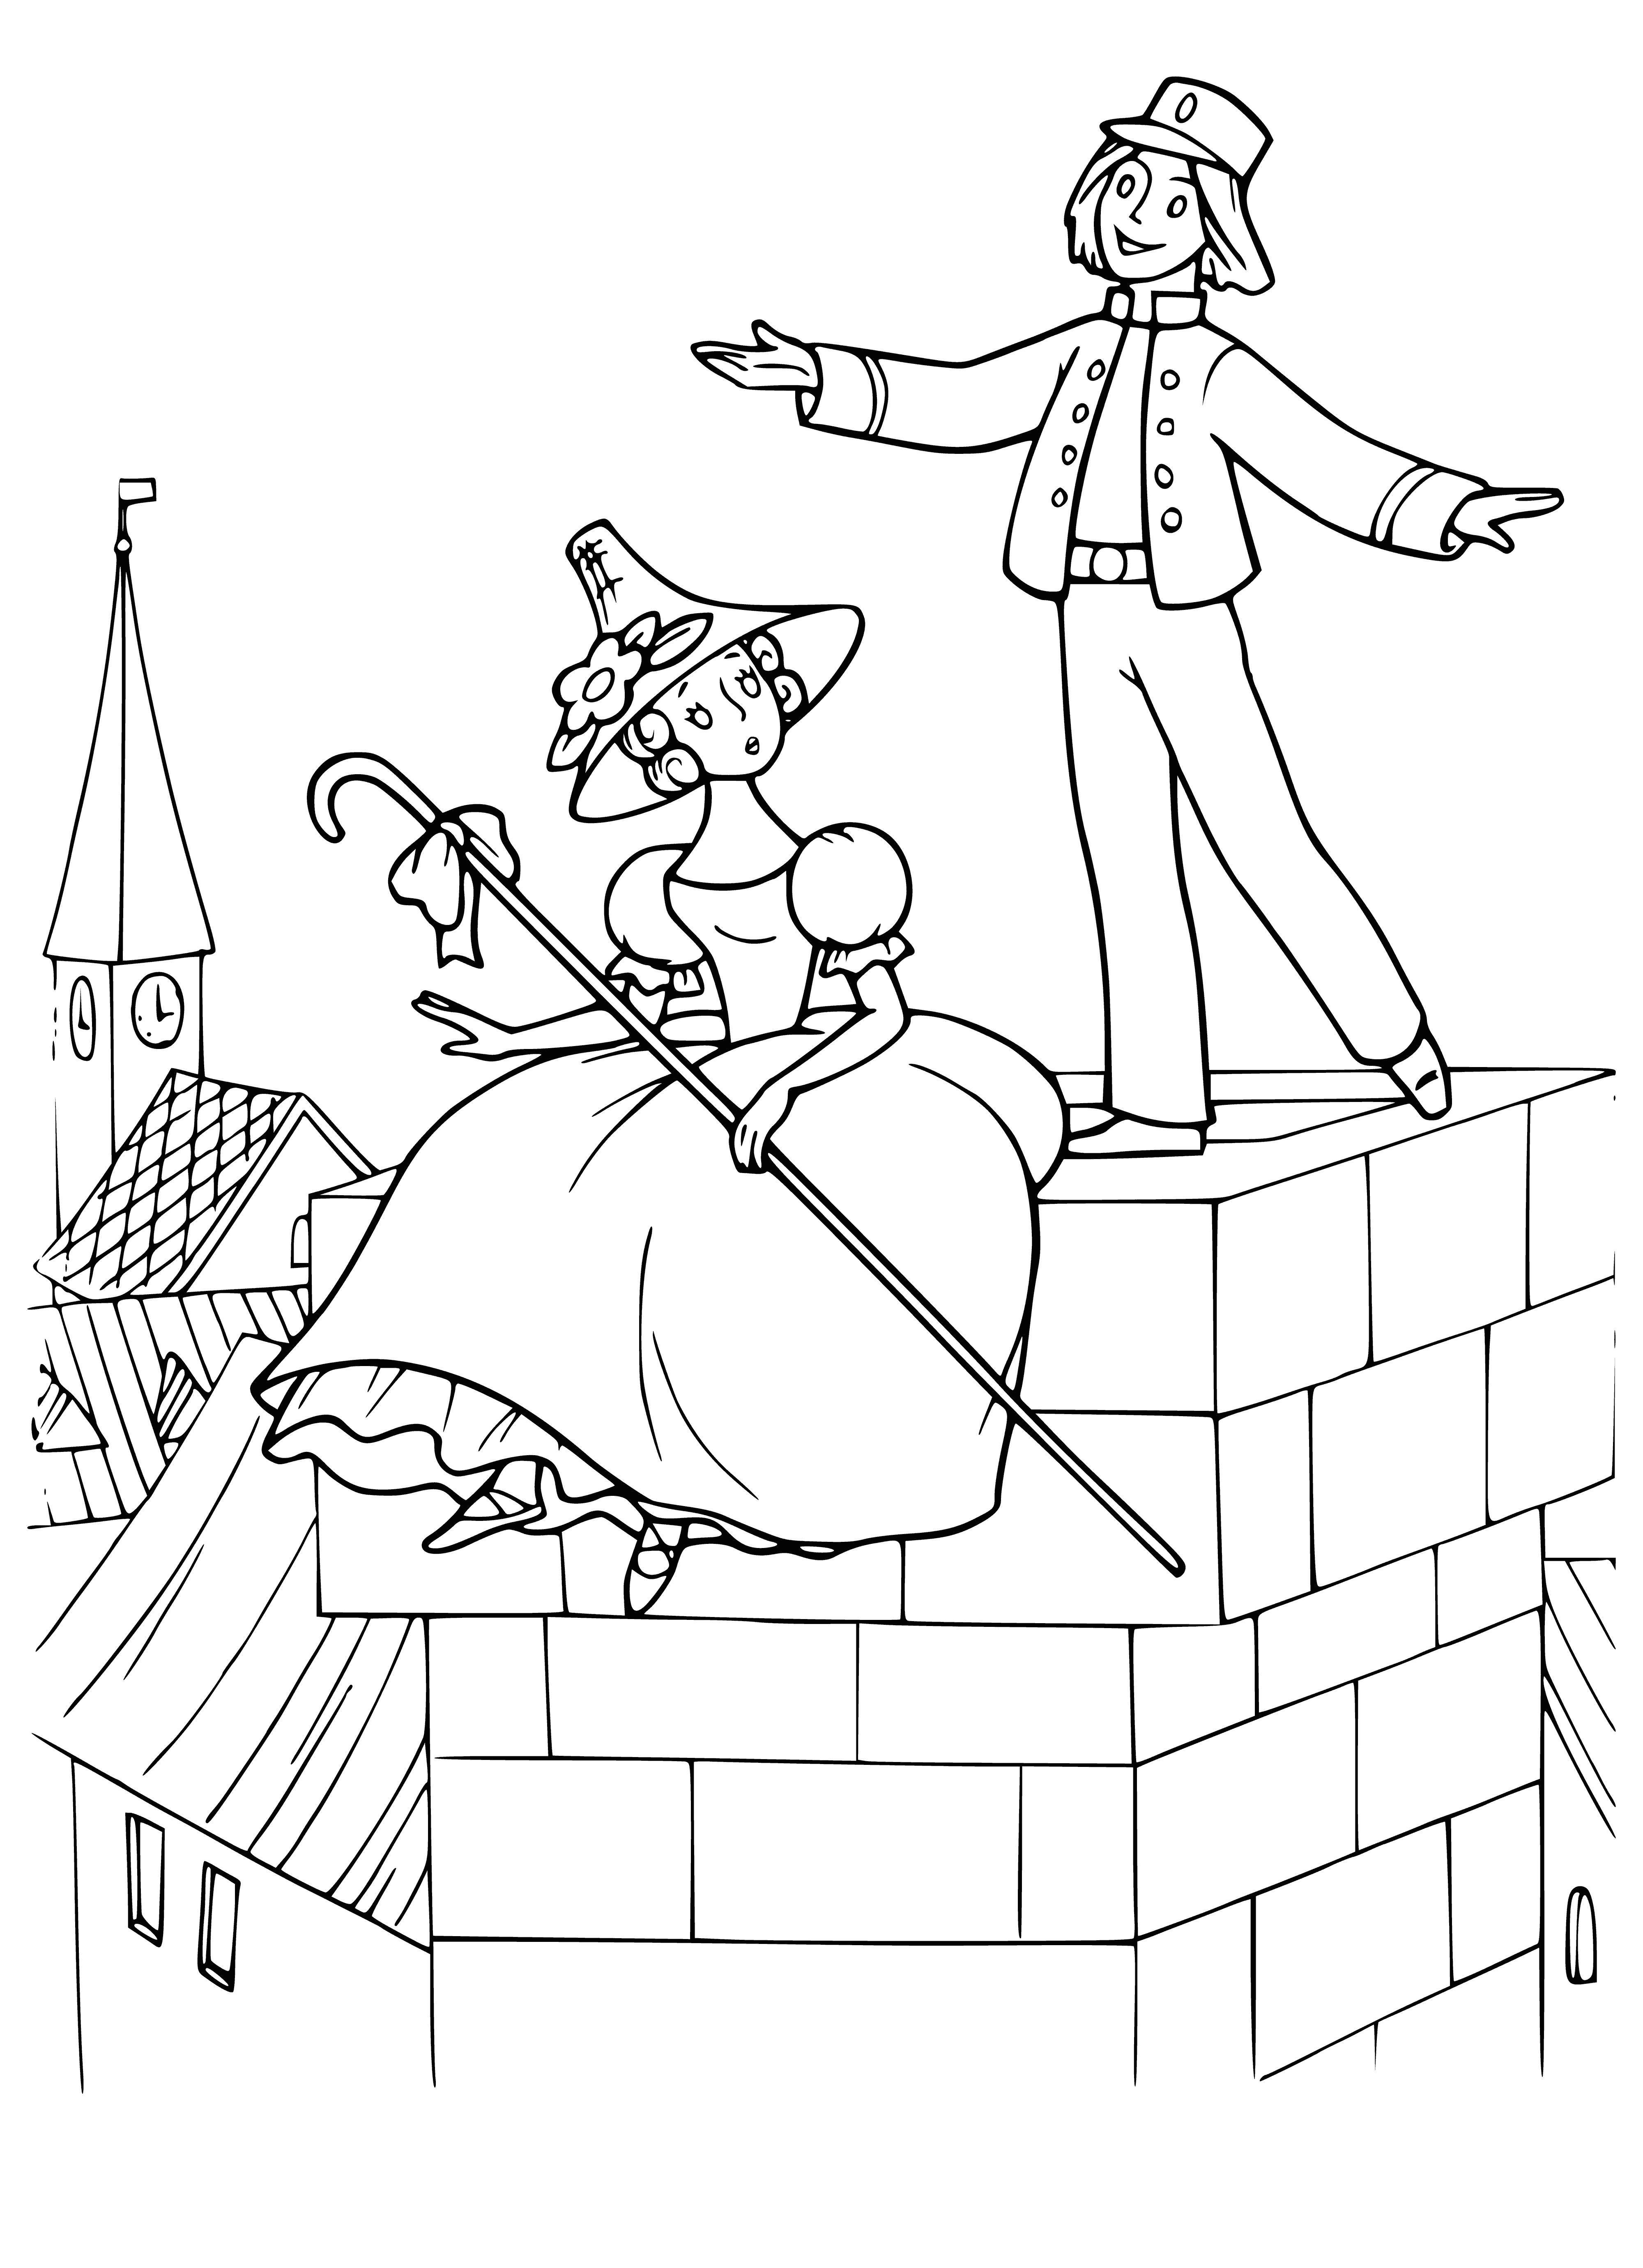 Shepherdess and chimney sweep coloring page